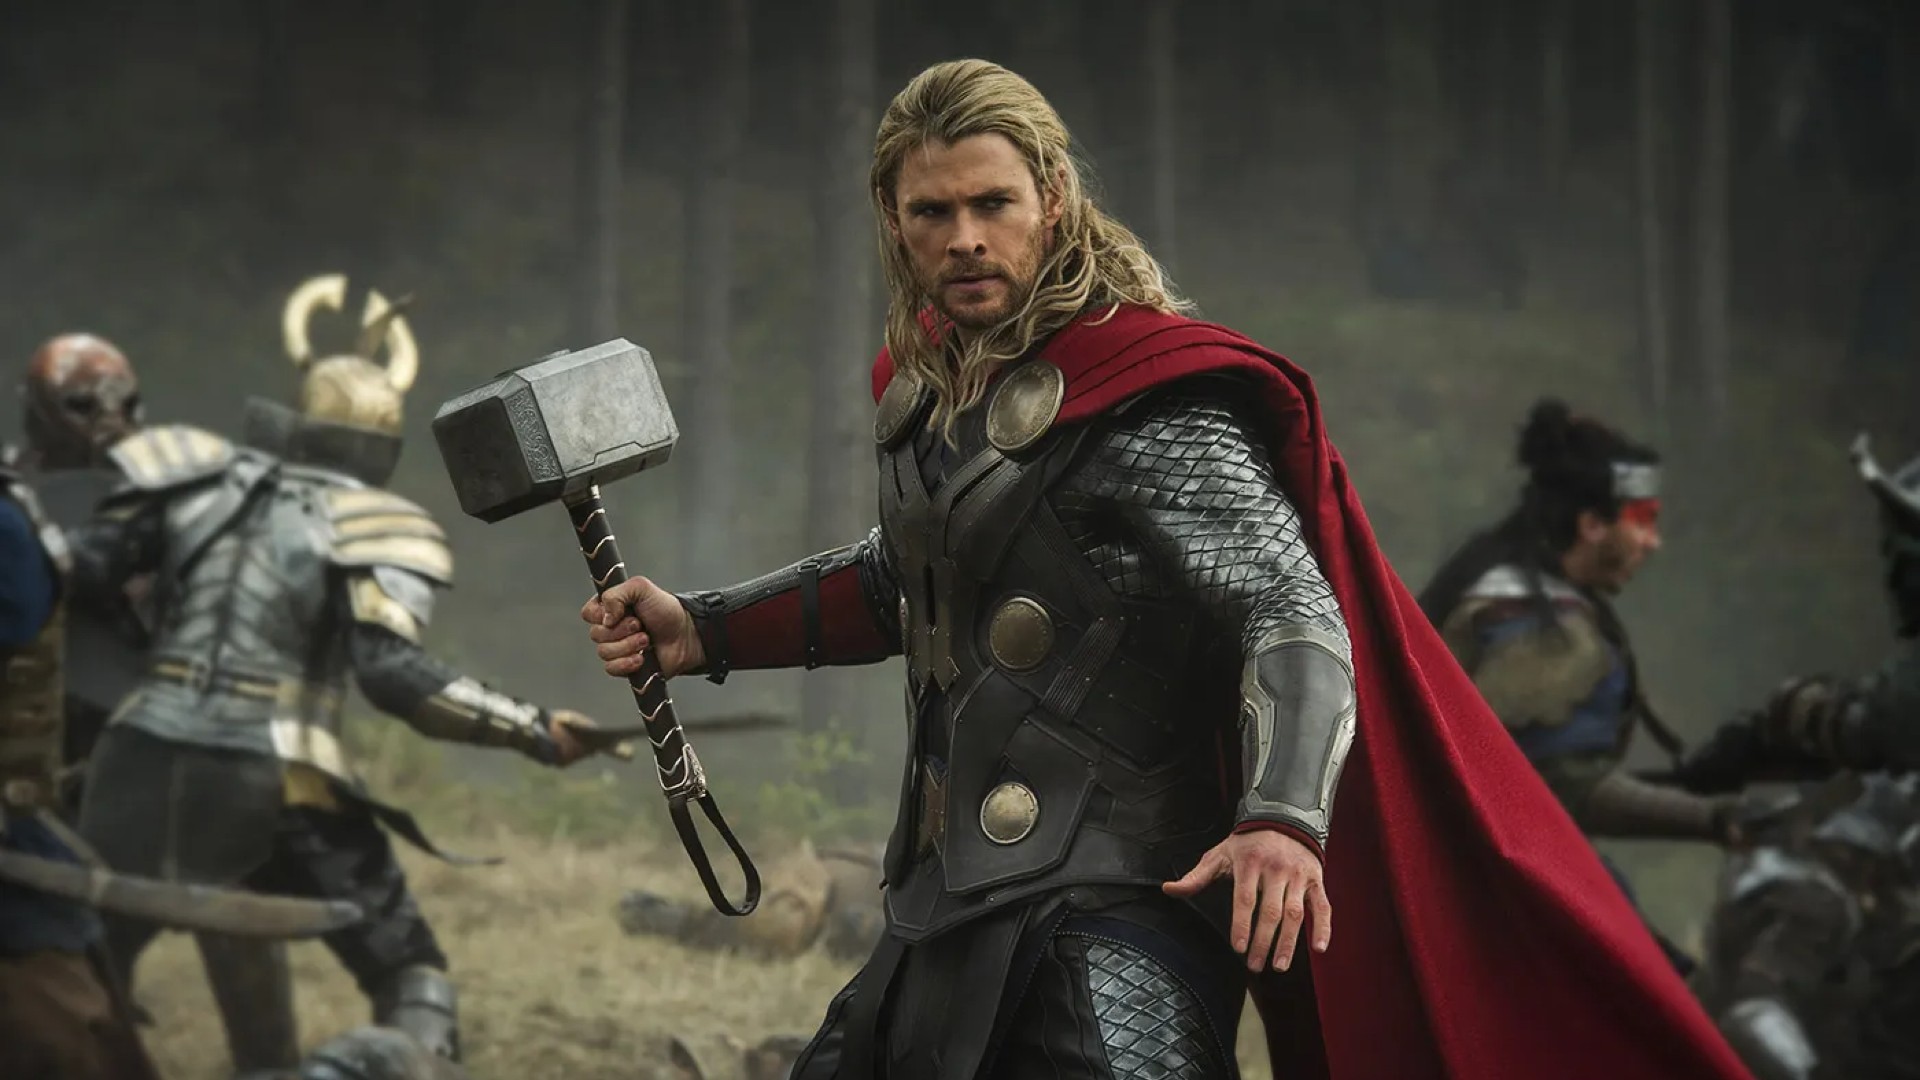 Chris Hemsworth's Thor poses with his hammer.